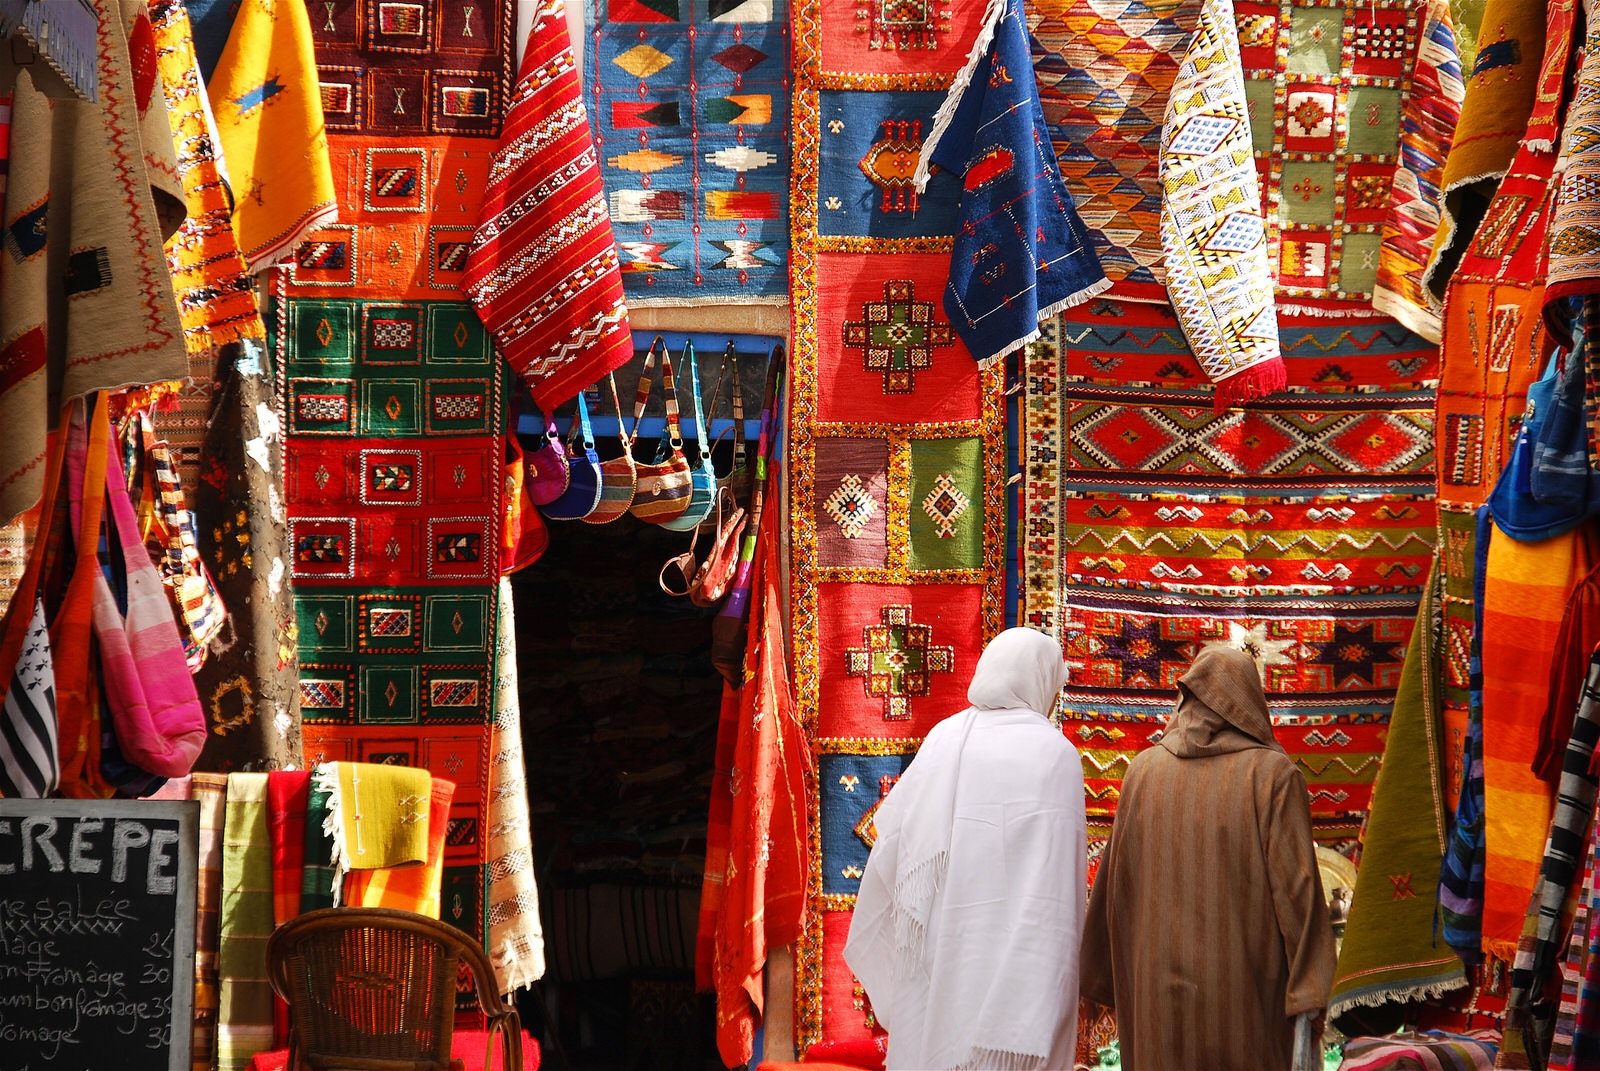 Morocco shopping tour in Essaouira to explore Souks and purchase local handicrafts